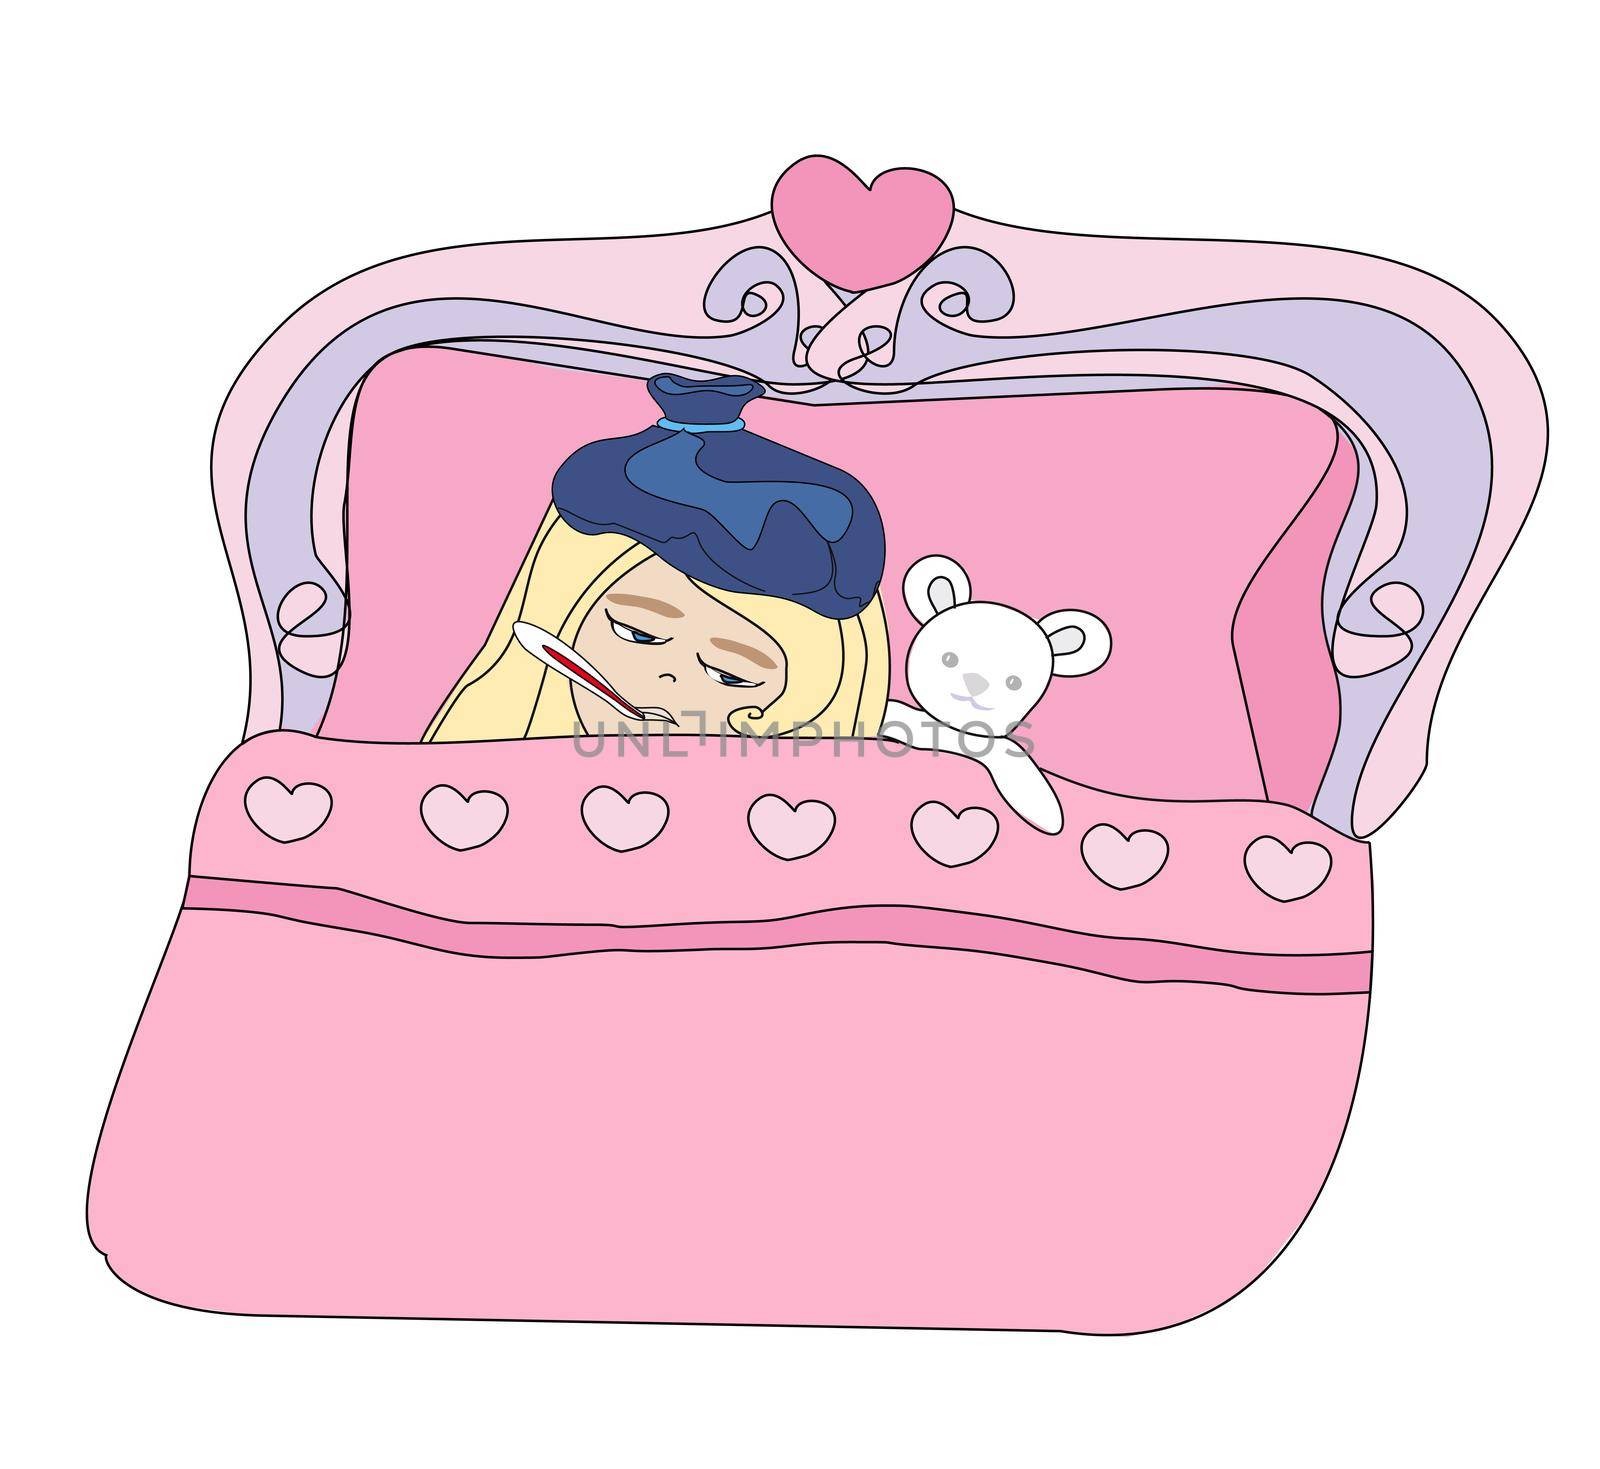 Illustration of a Sick Girl lying in bed